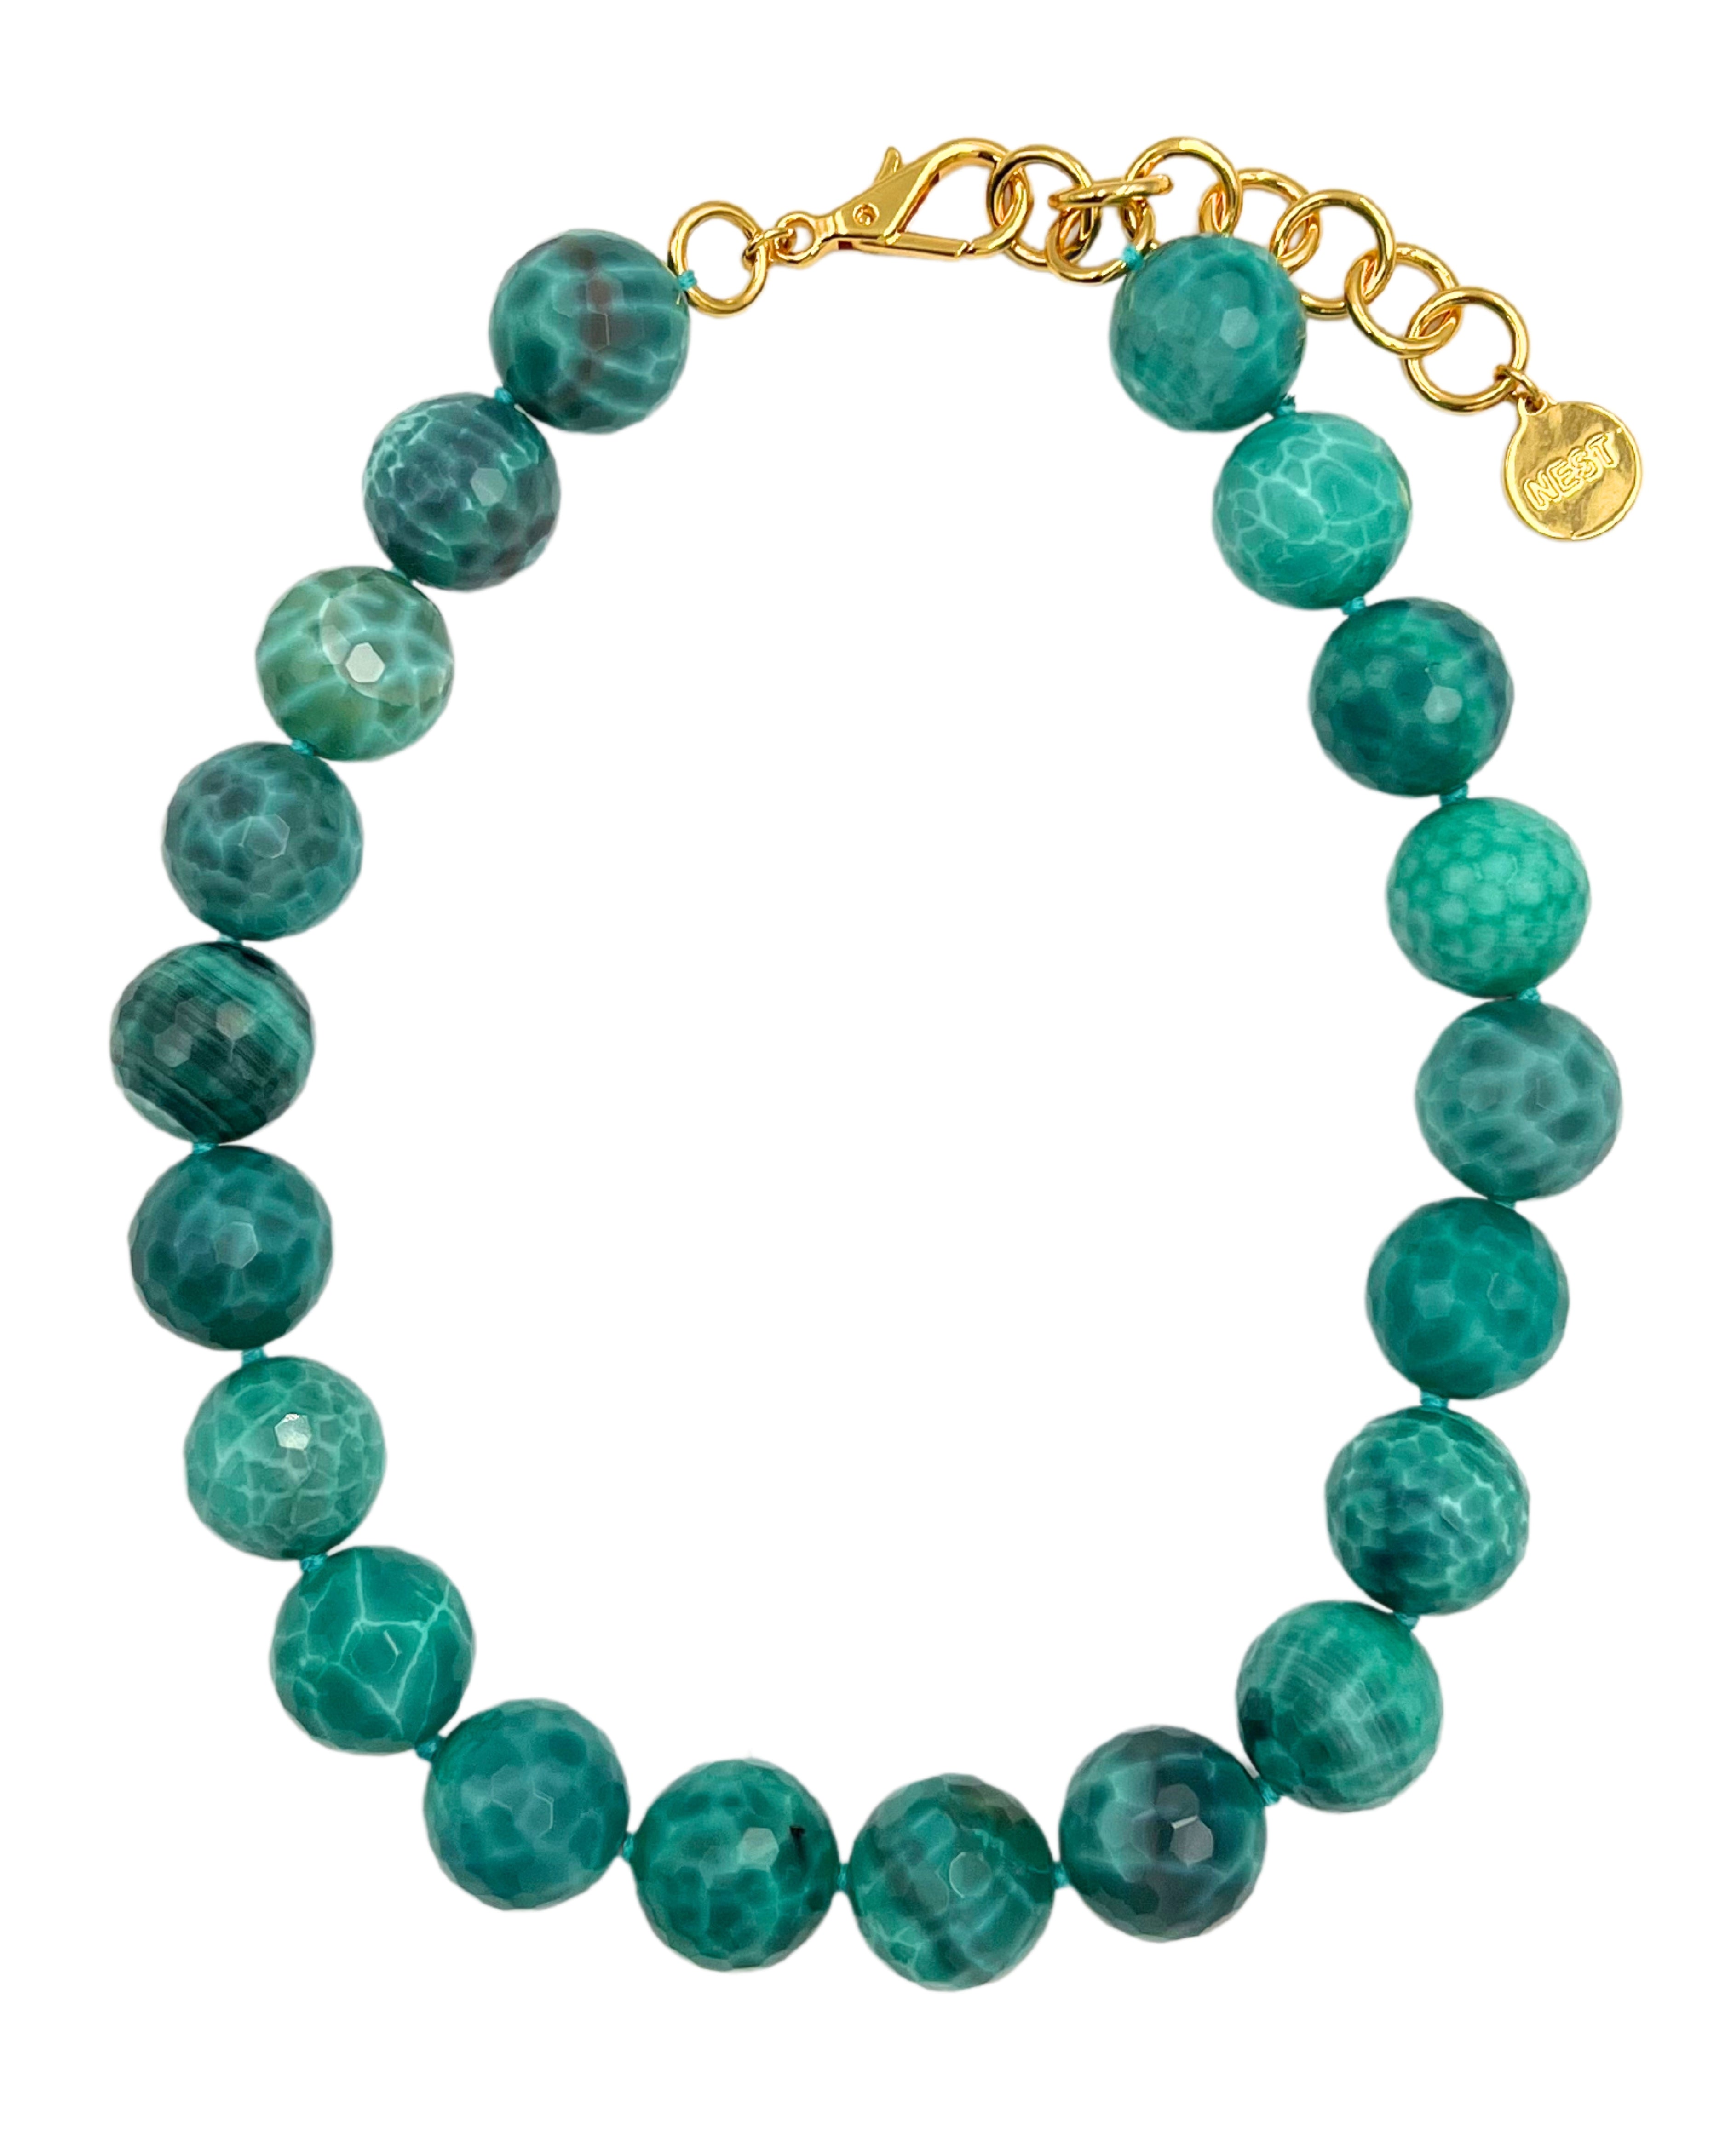 Peacock Green Agate Statement Strand Necklace